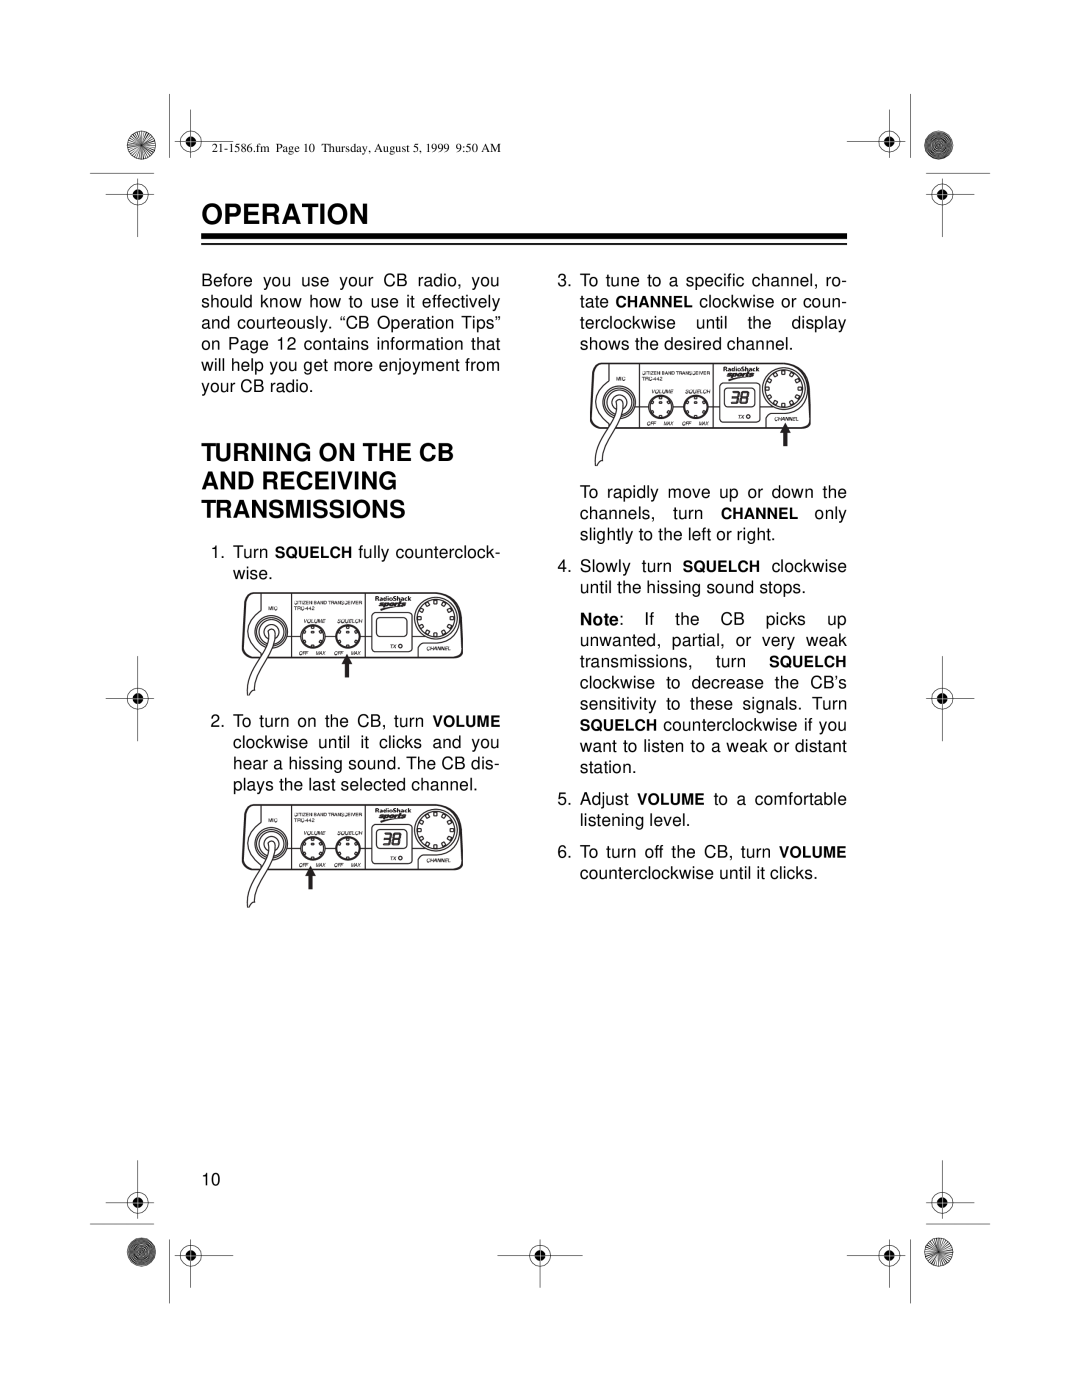 Radio Shack TRC-442 owner manual Operation, Turning On The Cb And Receiving Transmissions 